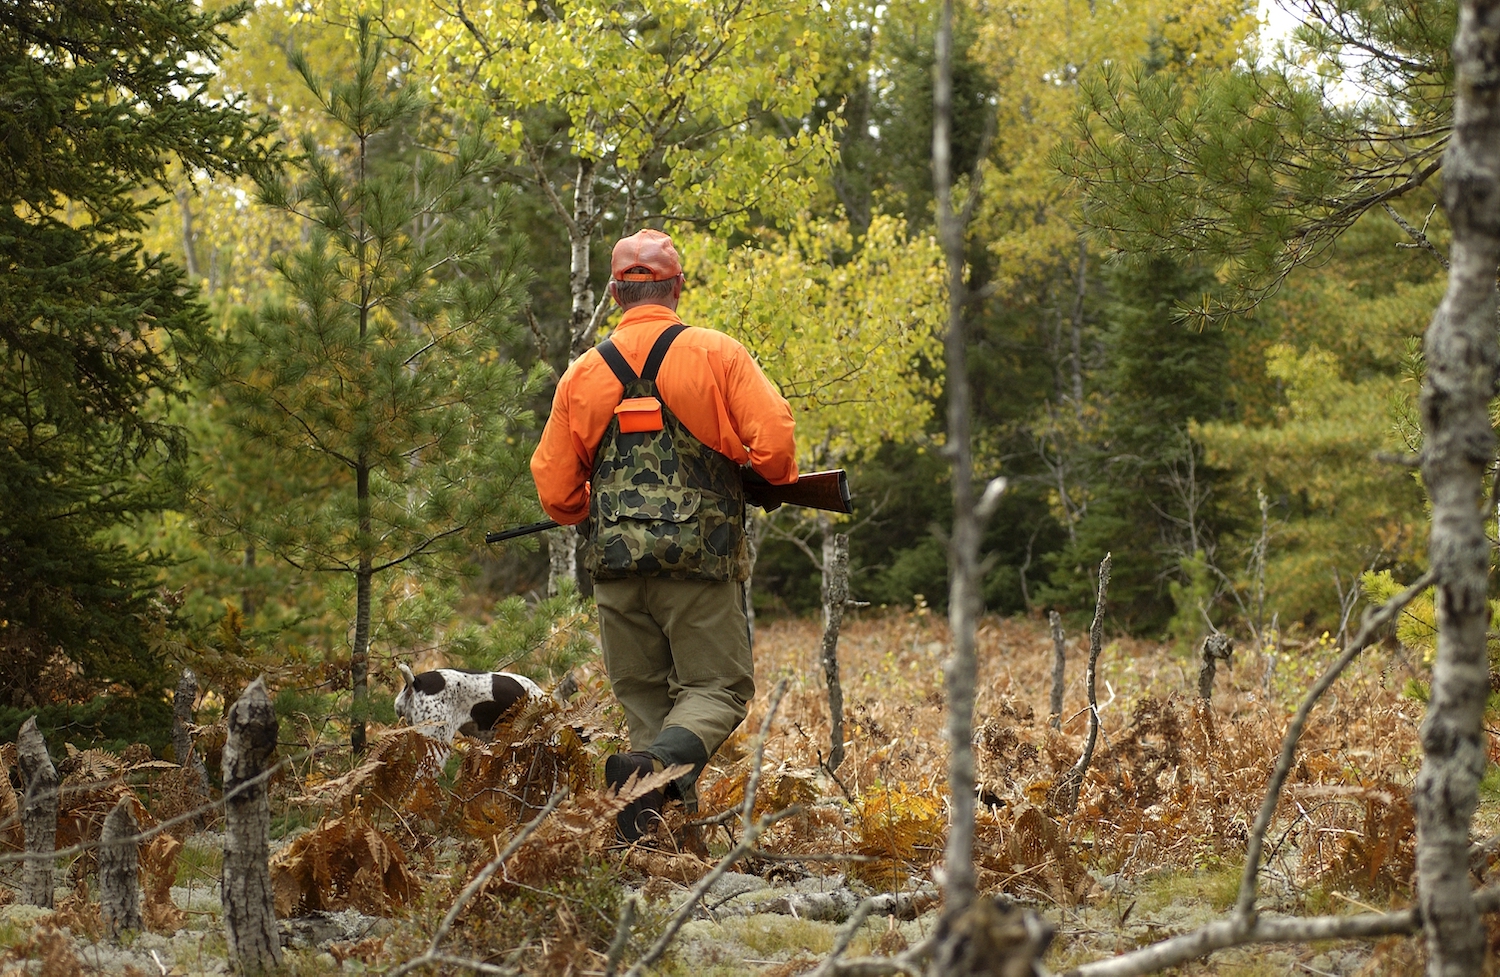 Hunting & fishing licenses sales on the rise; increase in female participation